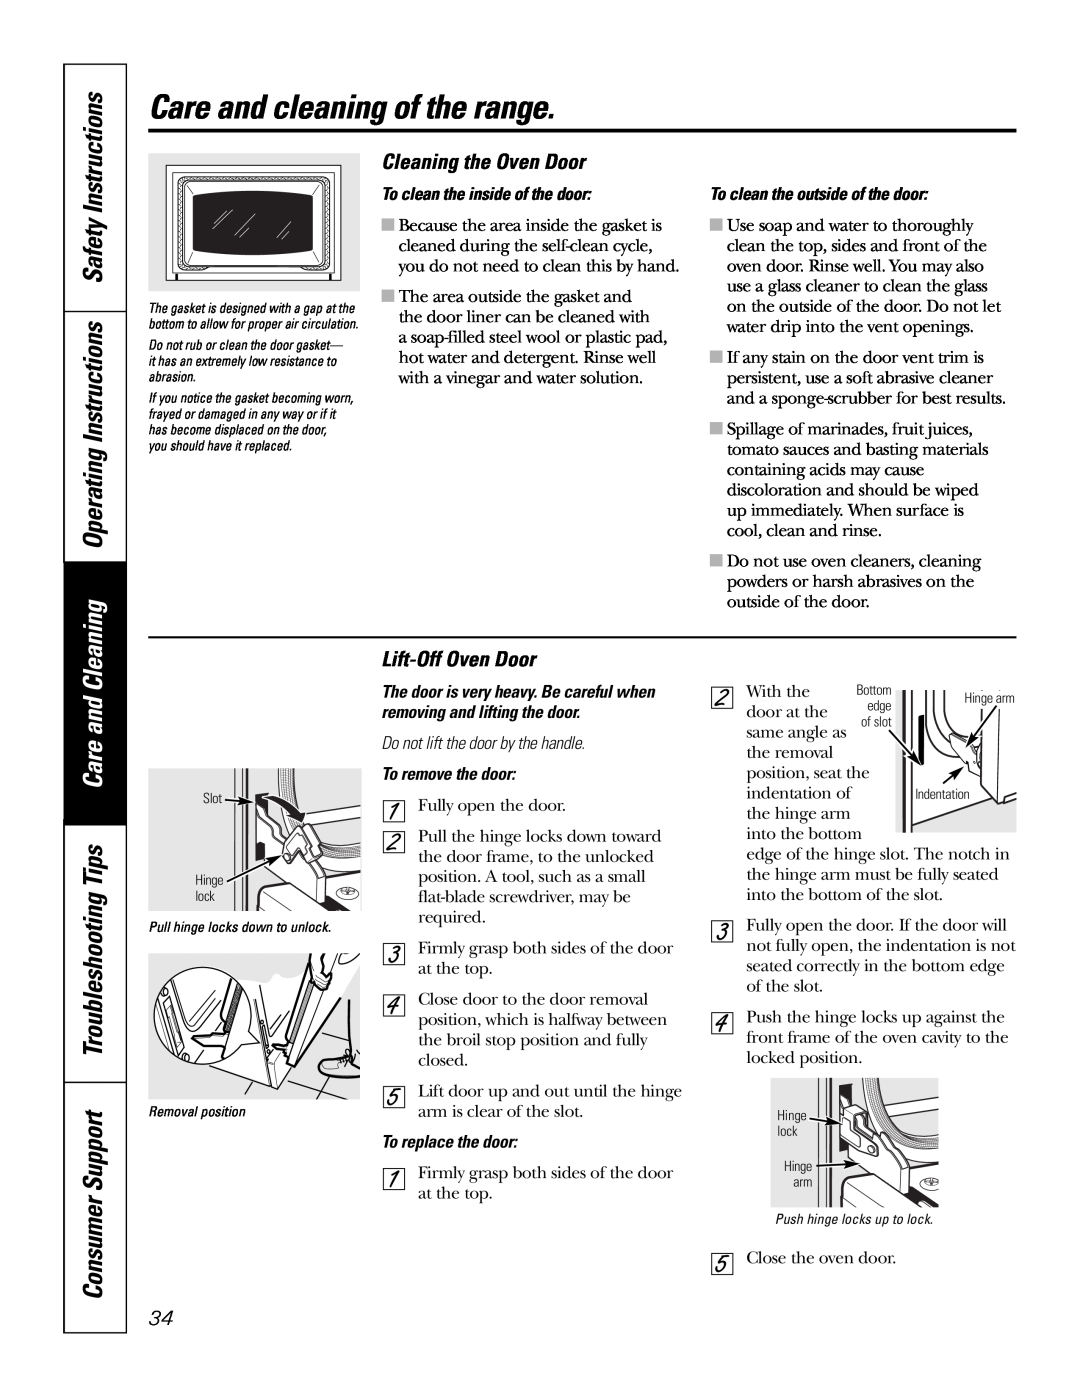 GE JB968 manual Cleaning Operating Instructions Safety, Cleaning the Oven Door, Lift-Off Oven Door 